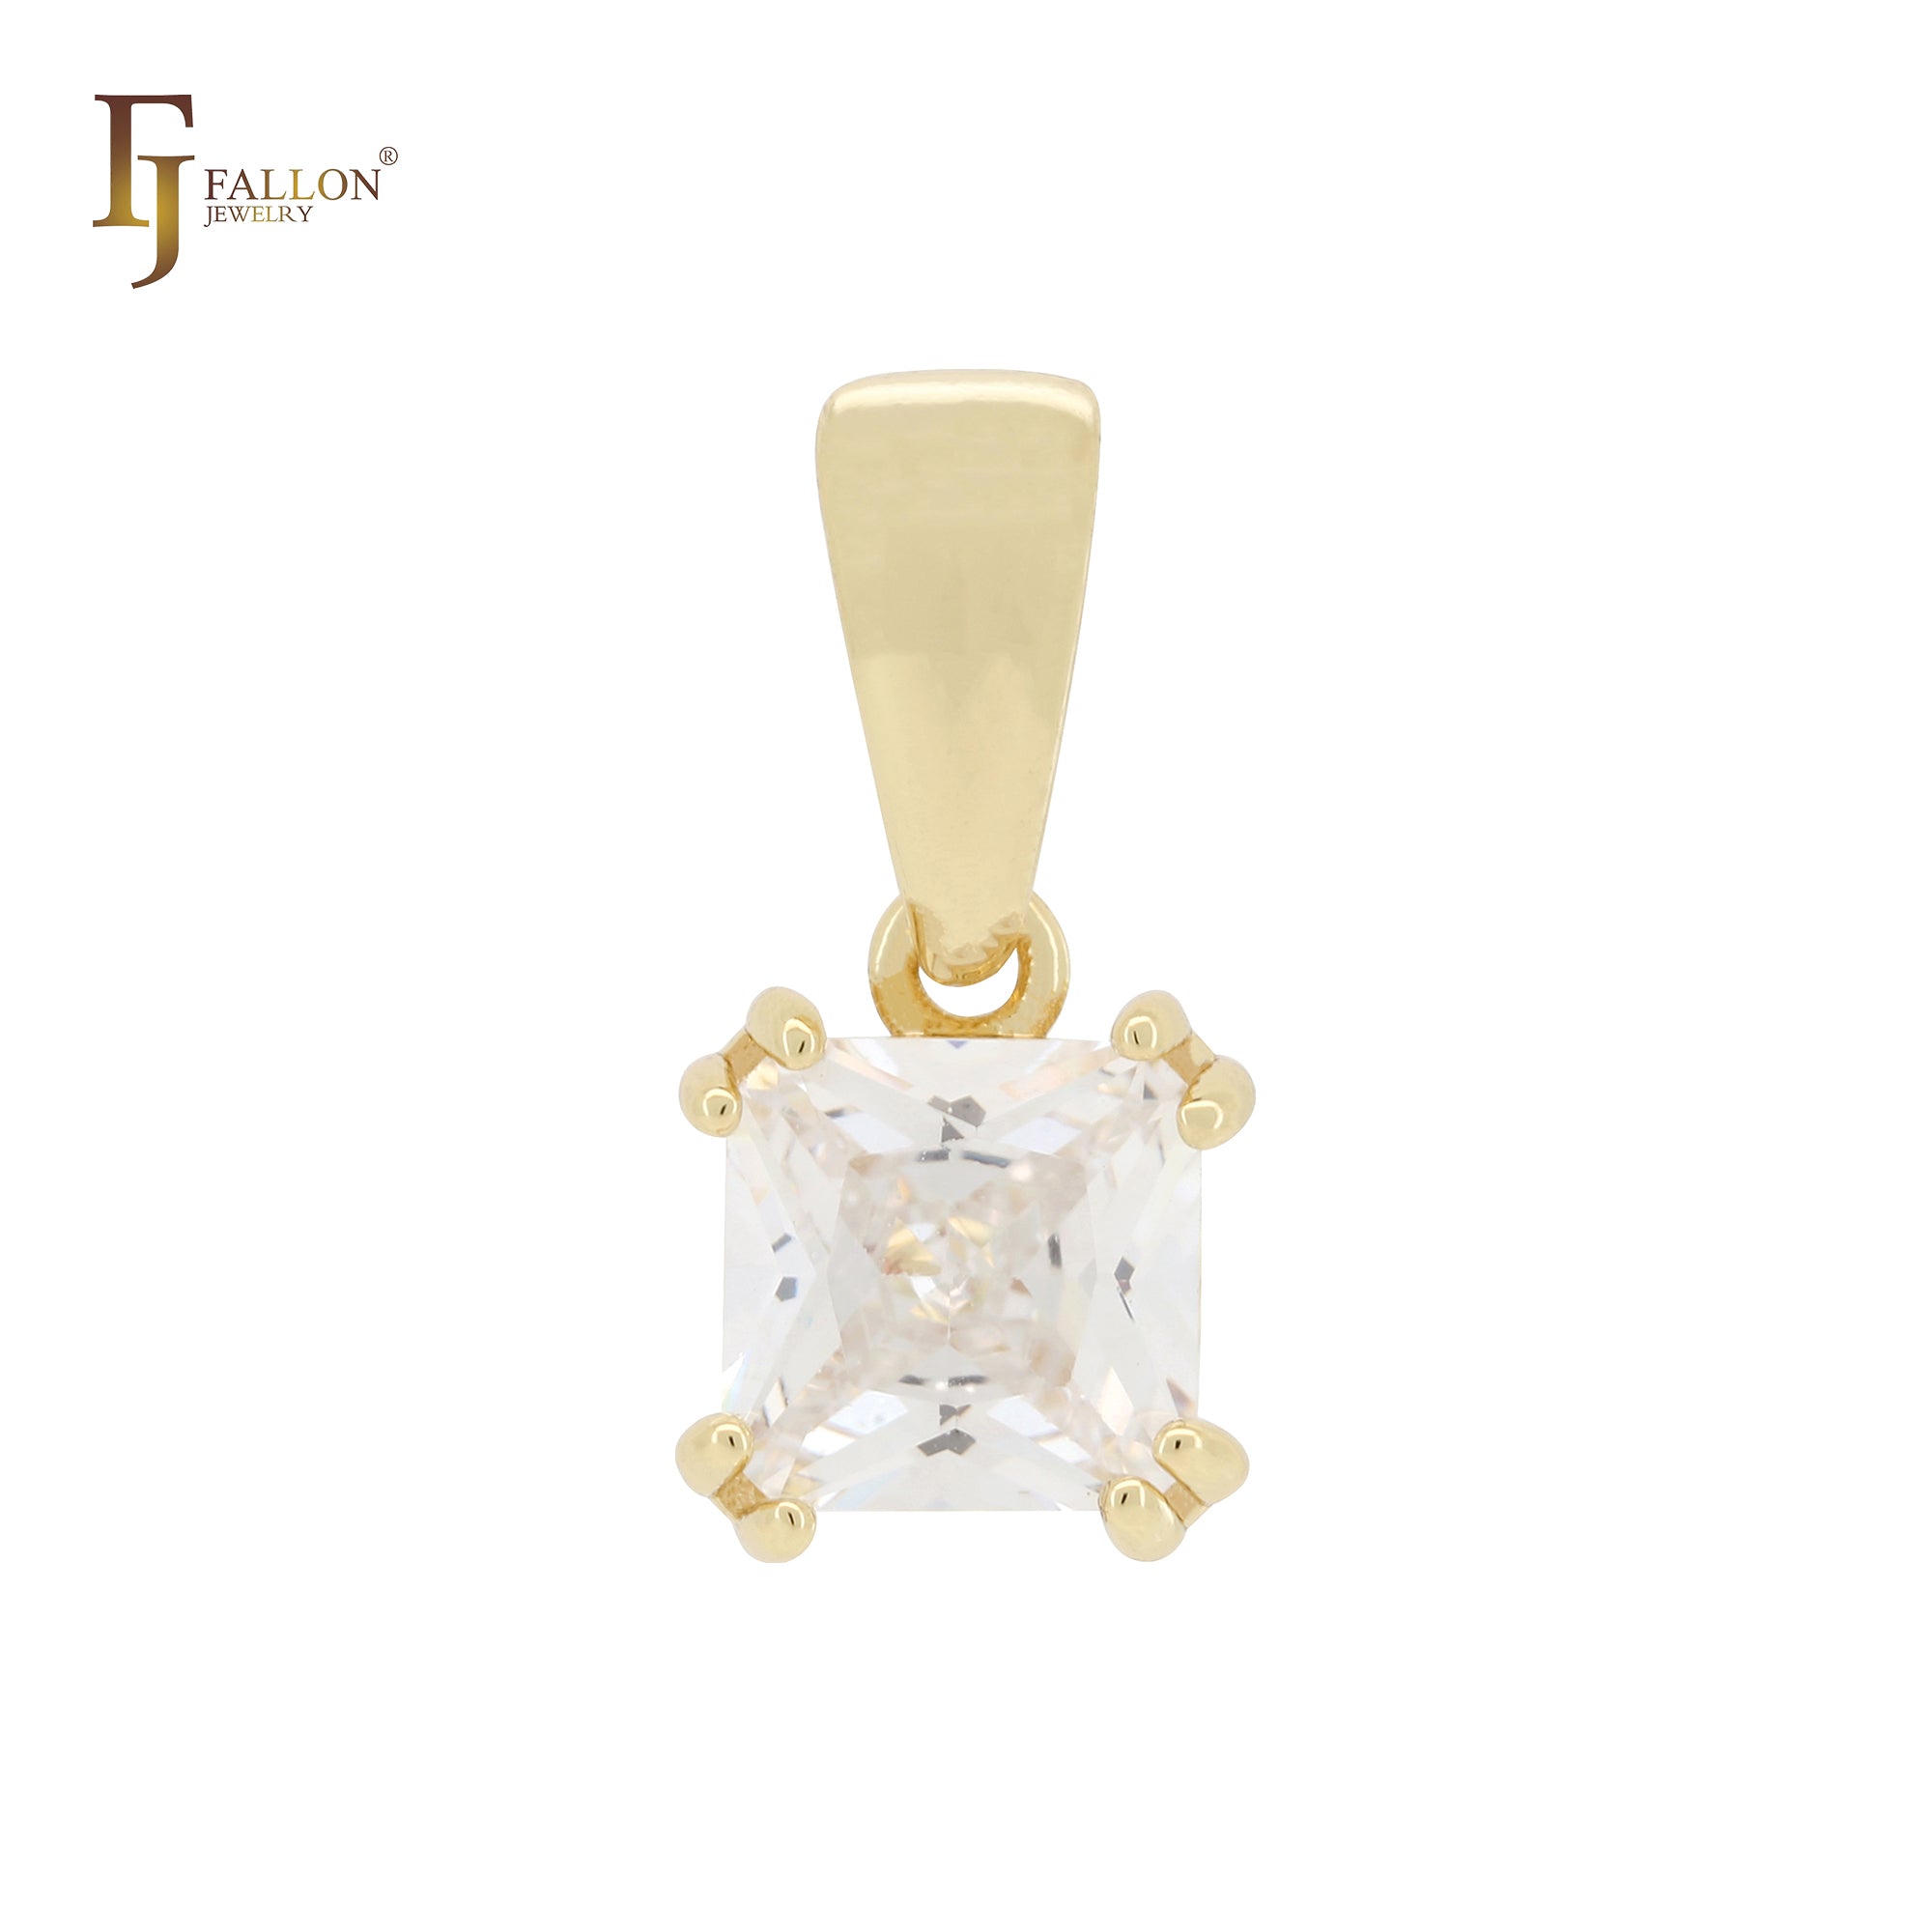 Claw setting squared white CZ solitaire 14K Gold, White Gold Pendant